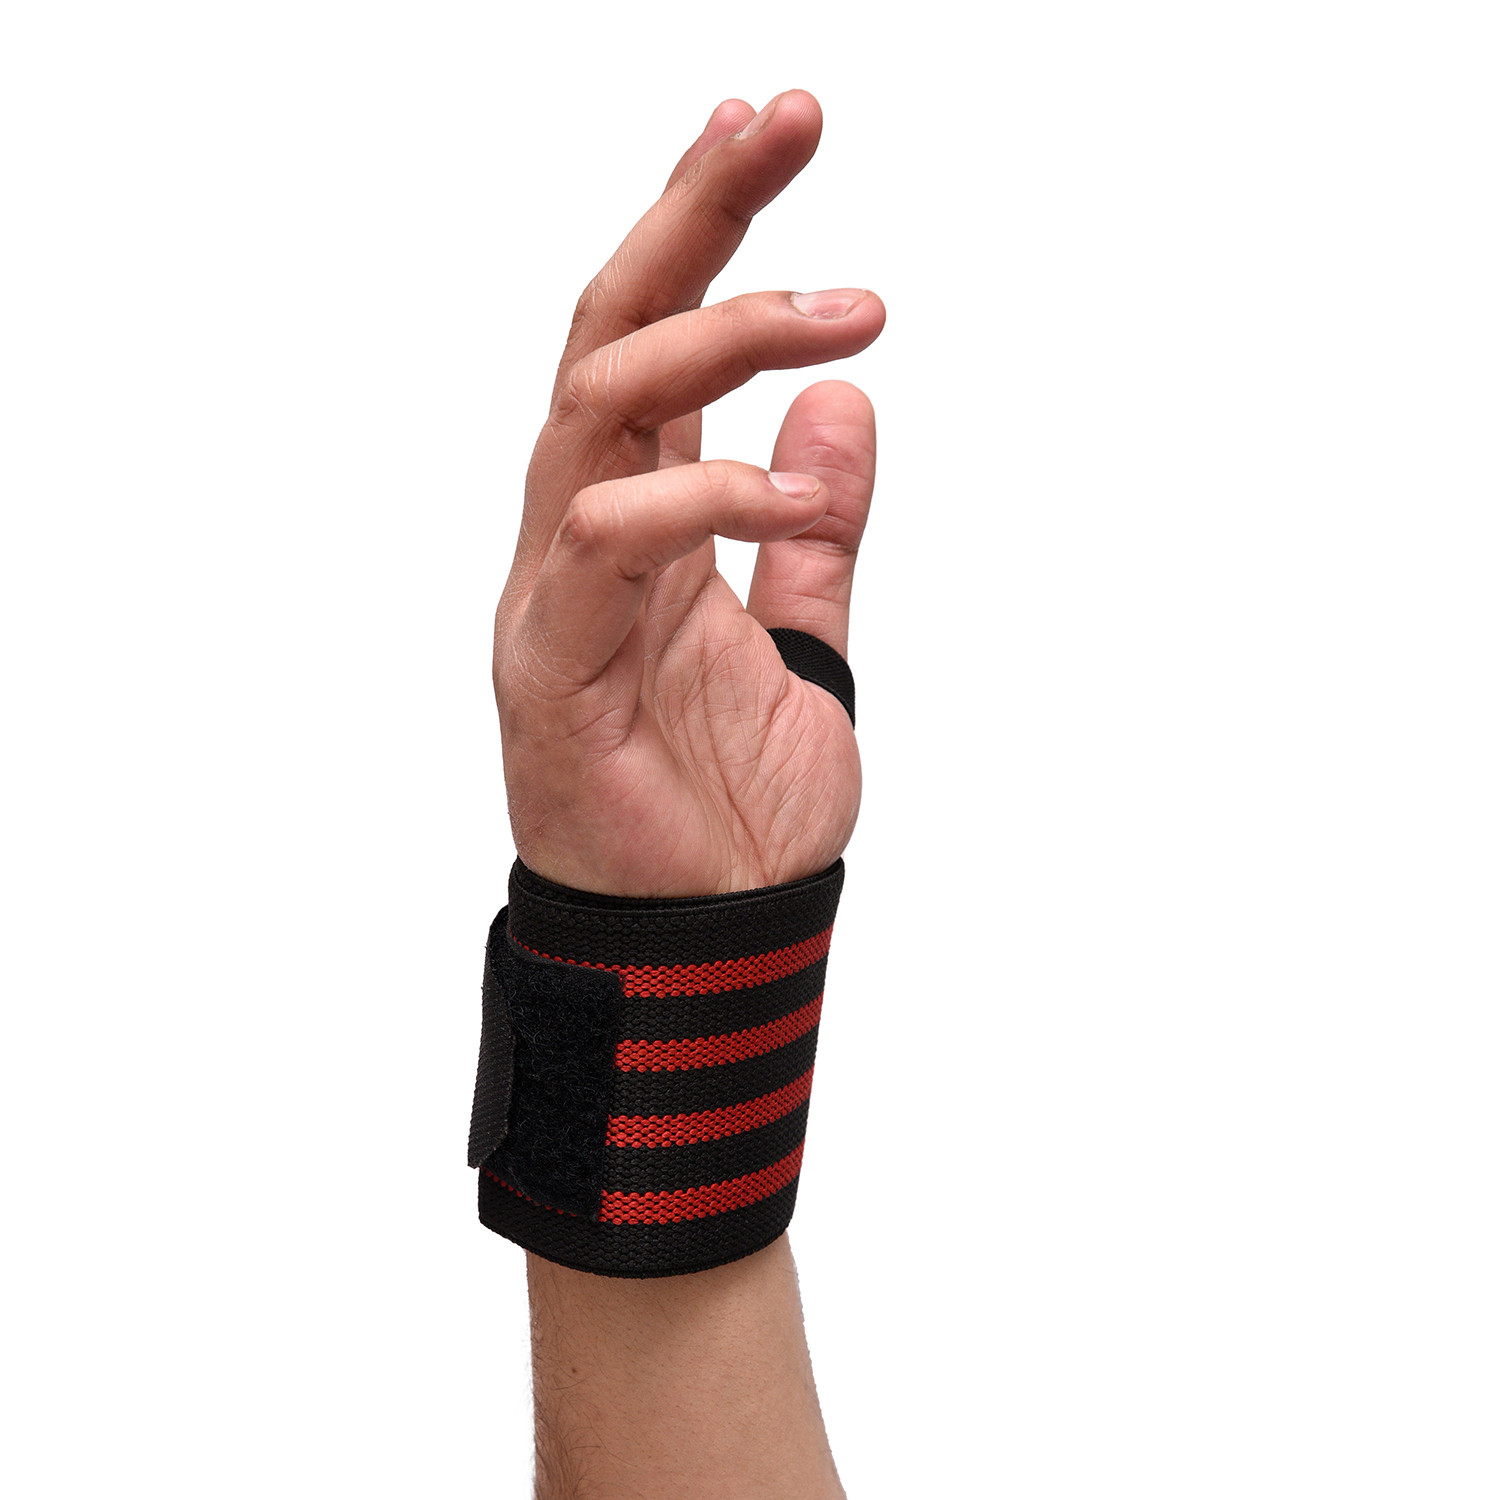 Kuber Industries Wrist Brace with Thumb Loop | Wrist Supporter for Gym | Nylon Wrist Wrap Band Strap for Men and Women | Pain Relief Band | 1 Piece | Red & Black